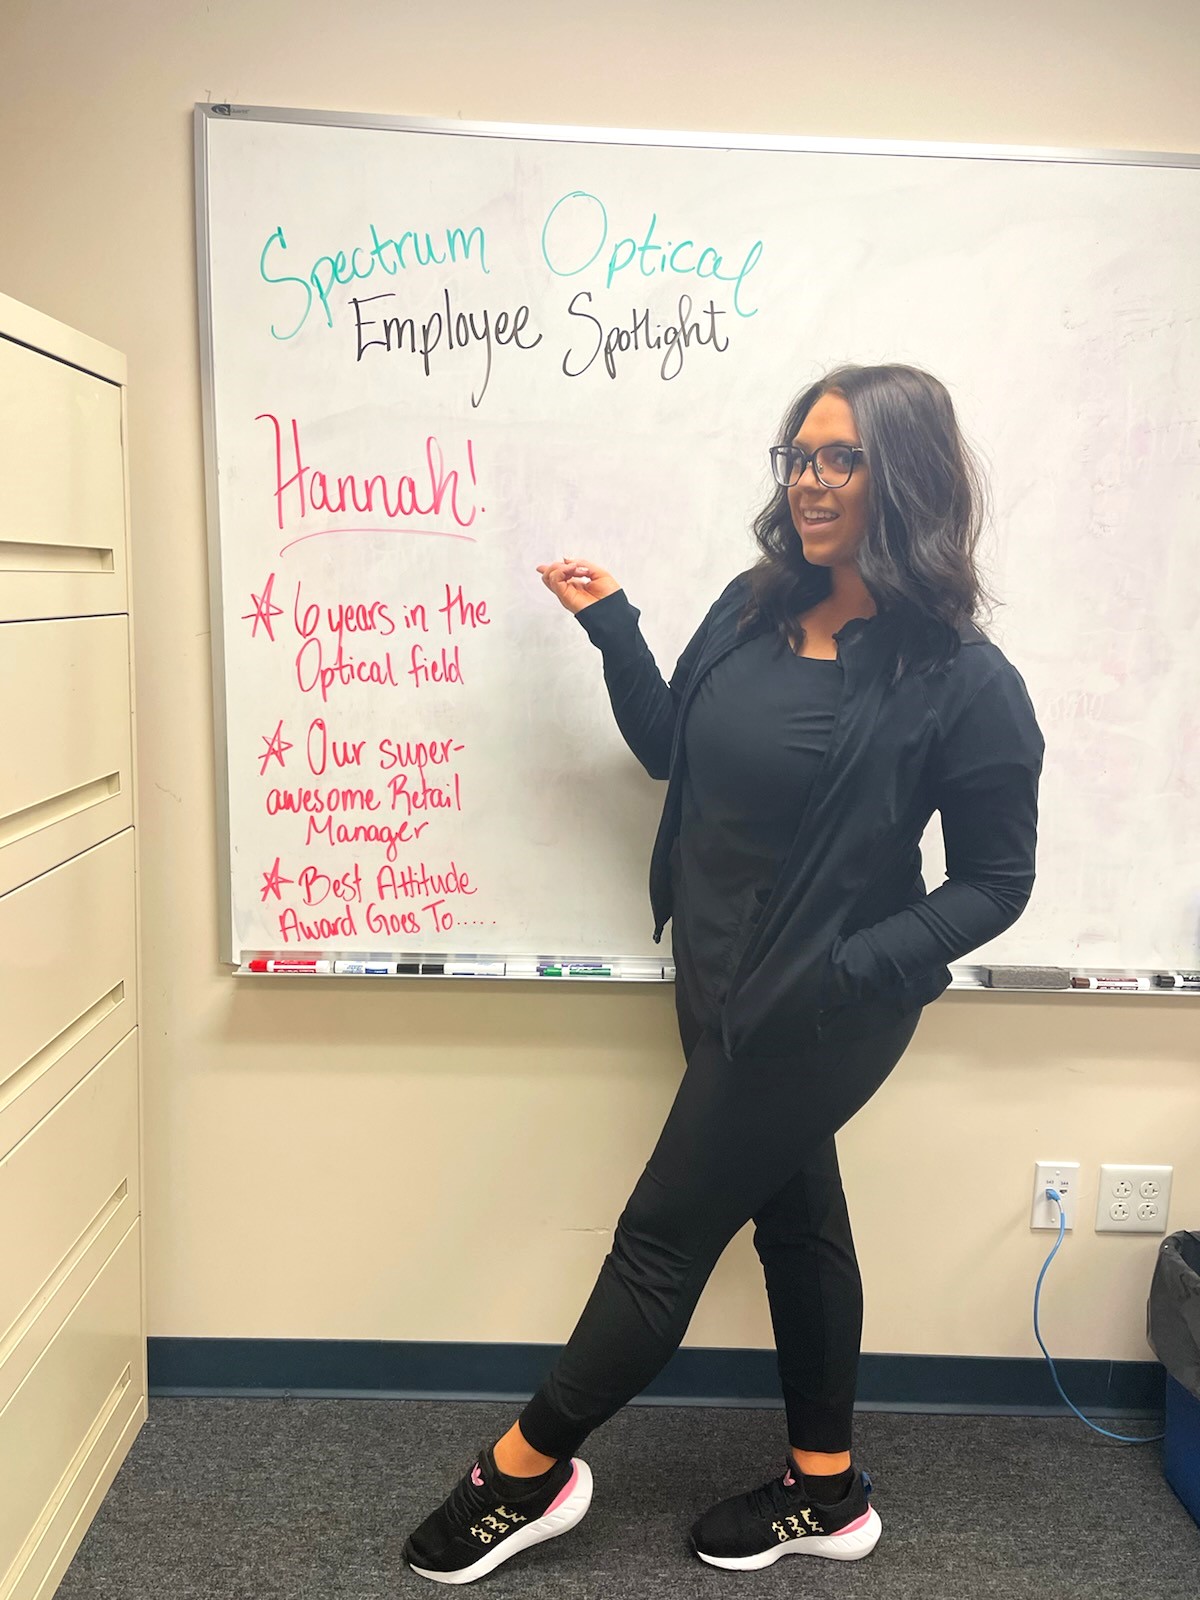 February Employee Spotlight (our Retail Manager, Hannah) stands in front of a white board pointing to her name.